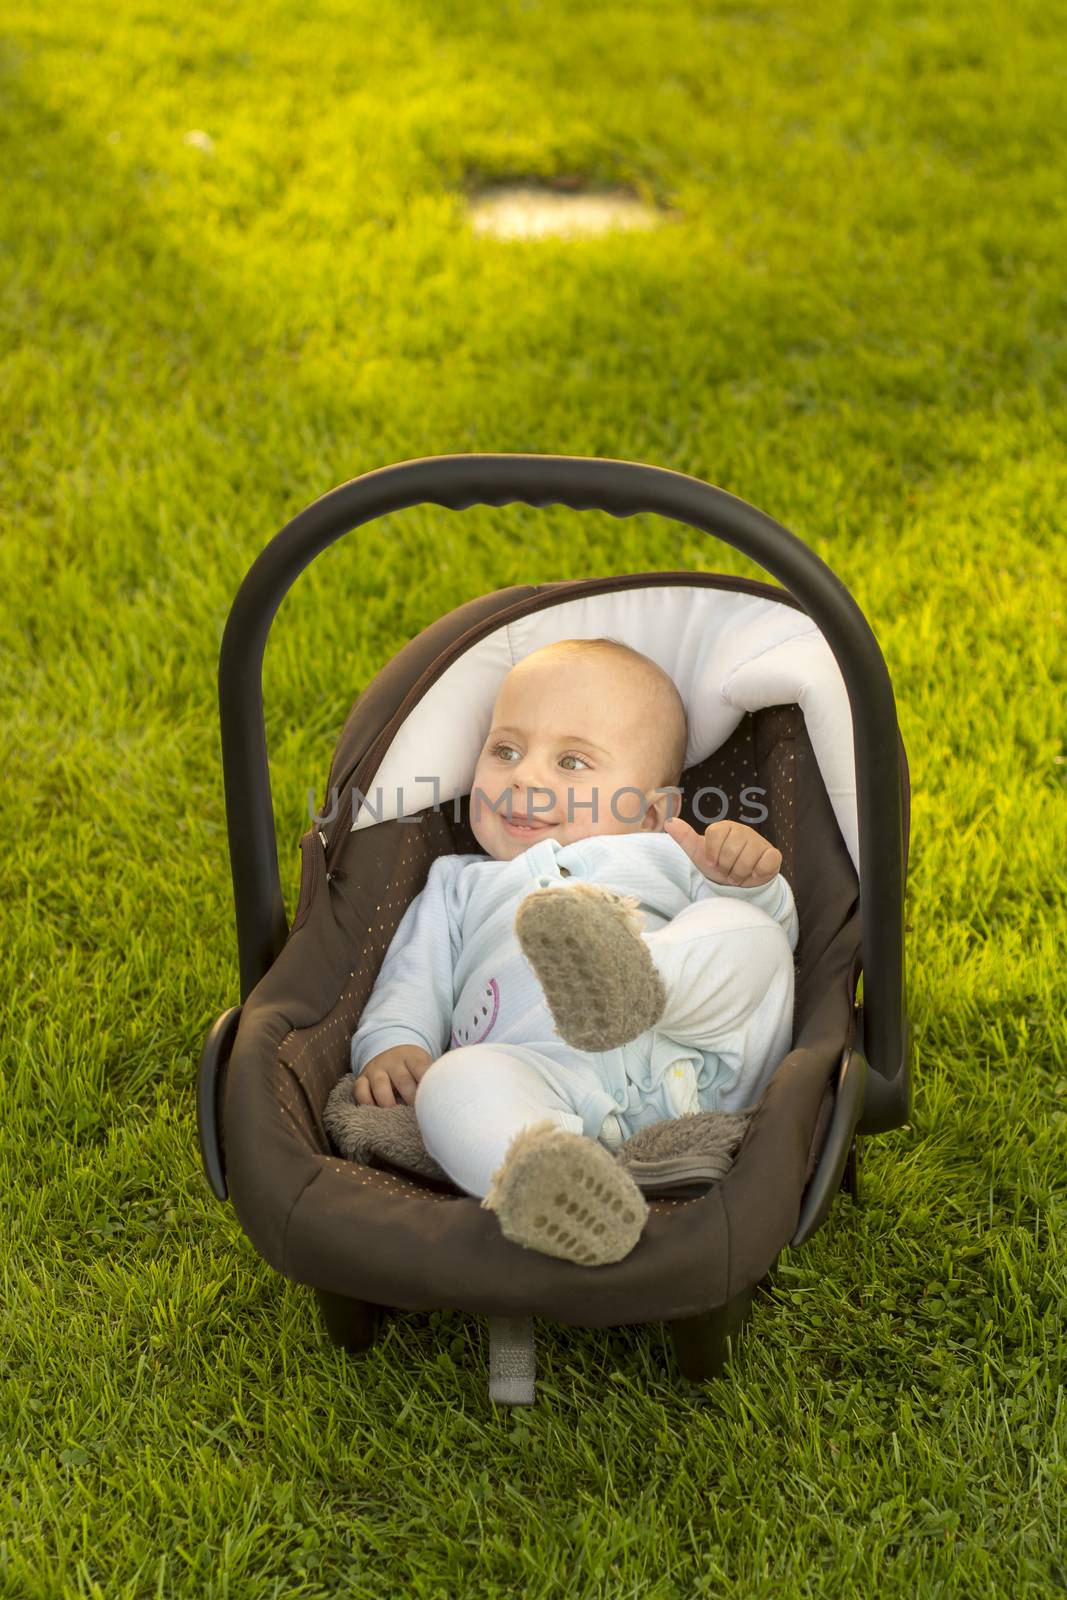 Safe baby in car seat on grass, nature